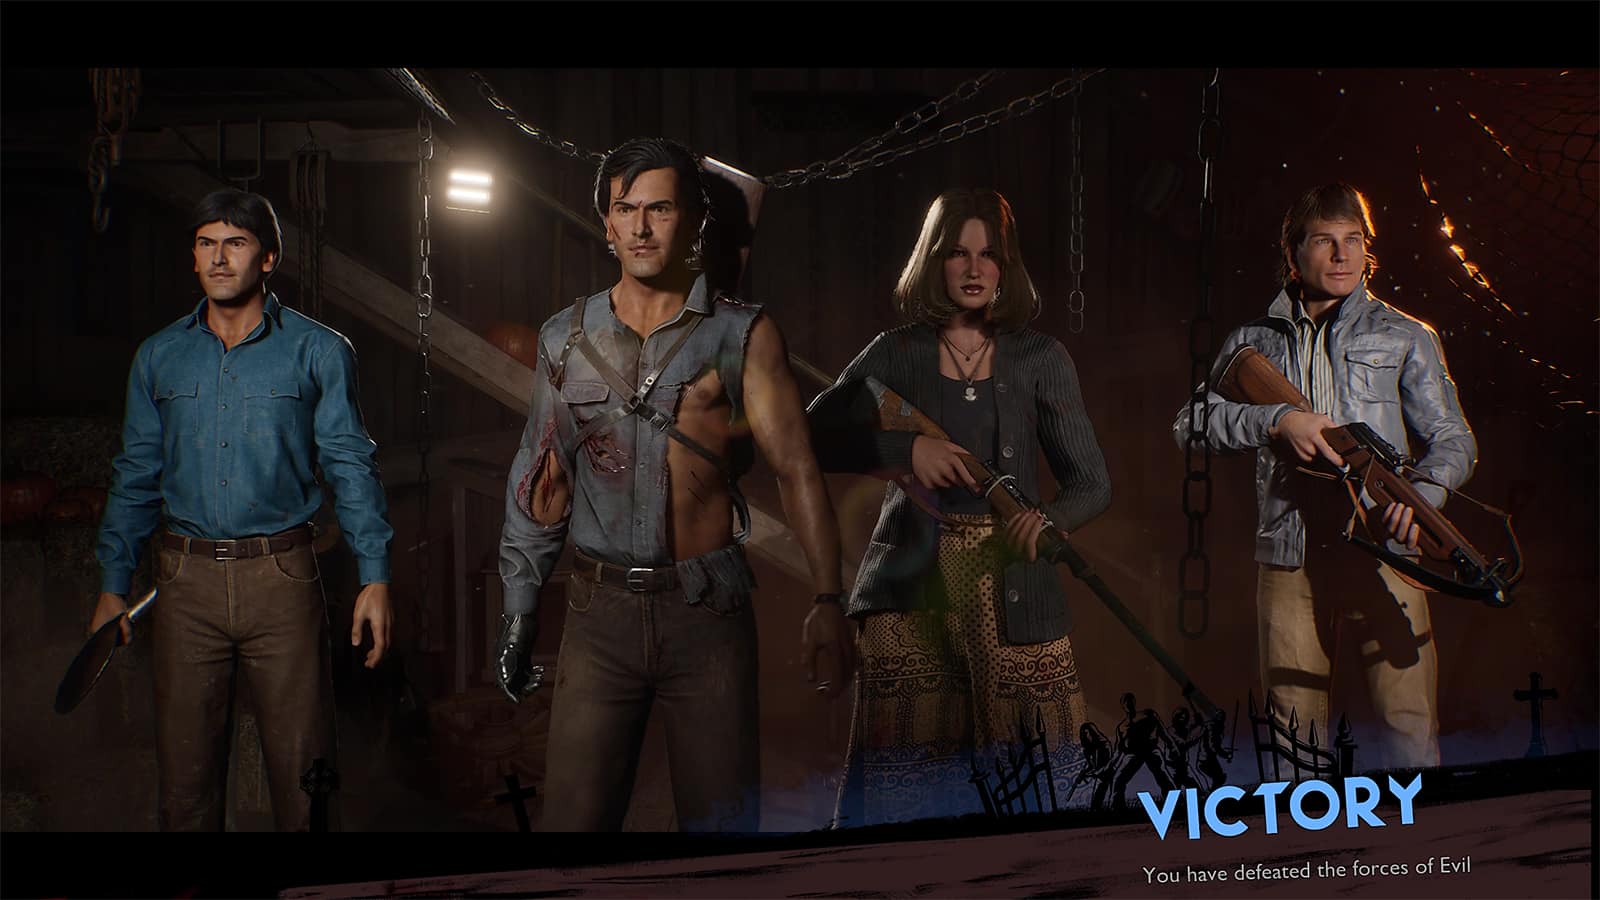 Review: Evil Dead: The Game - Experience a Fantastic Scary